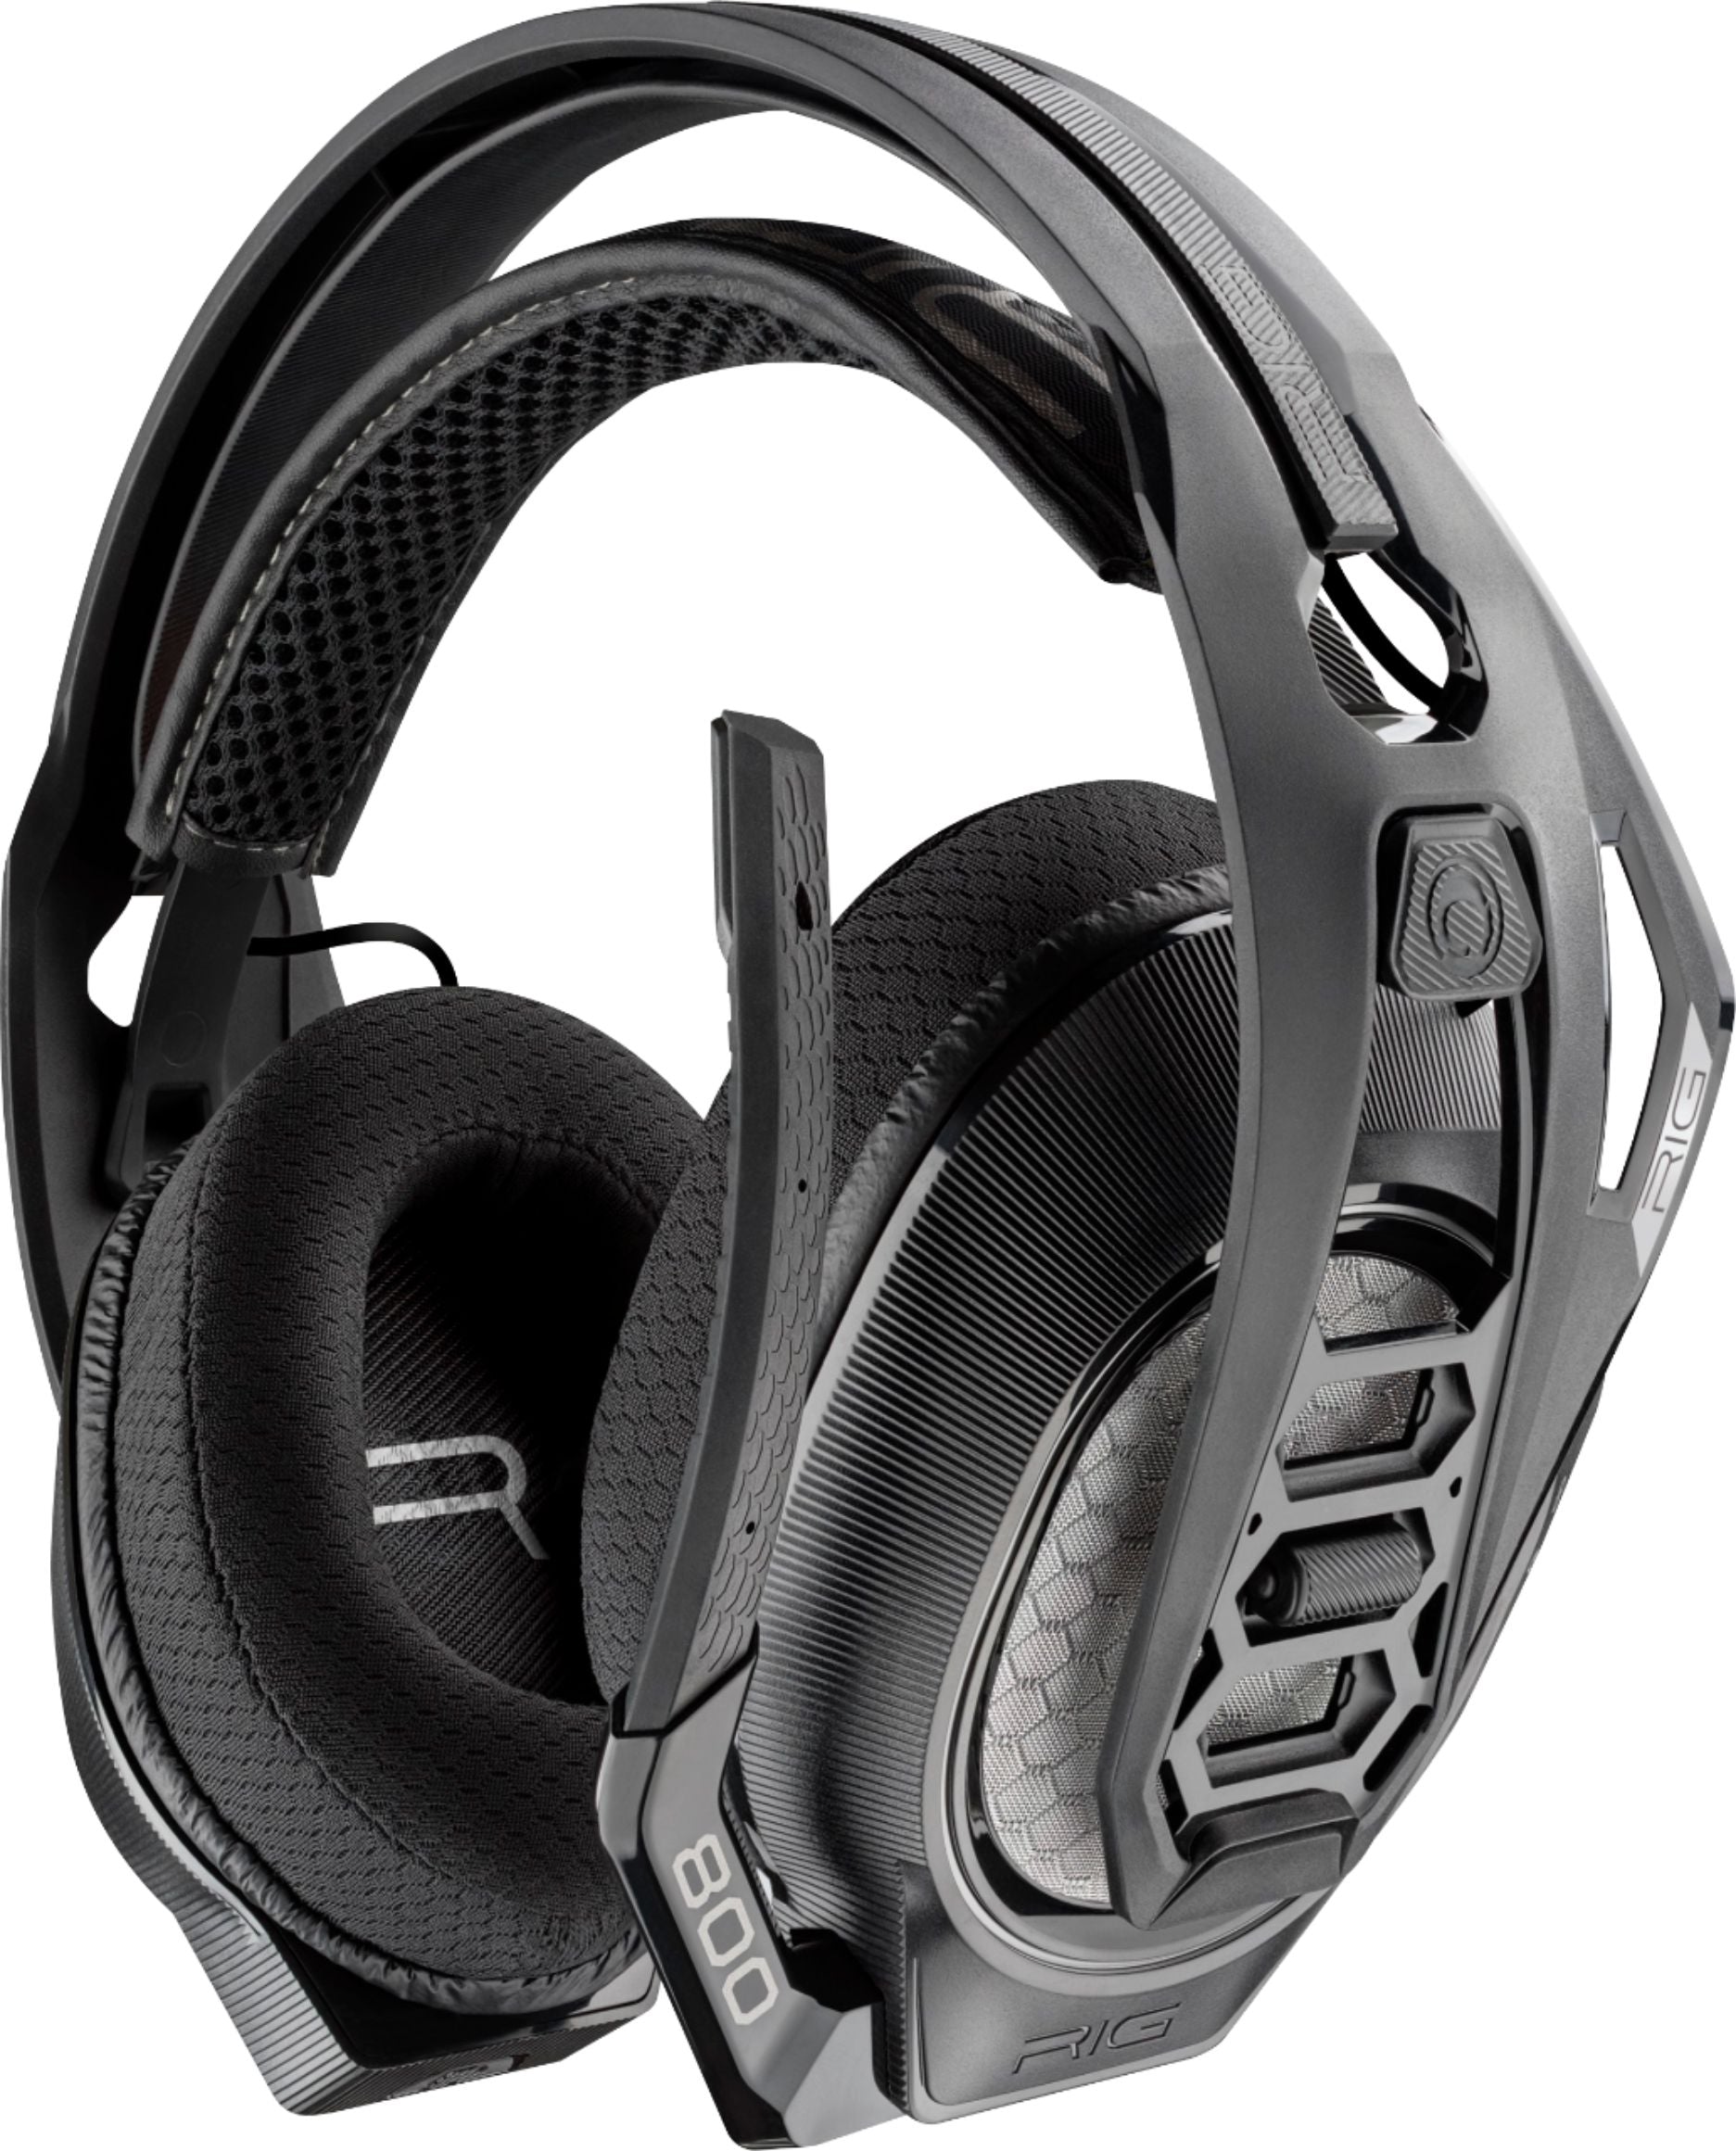 Plantronics - RIG 800LX SE Wireless Gaming Headset with Dolby Atmos for Xbox One - Black